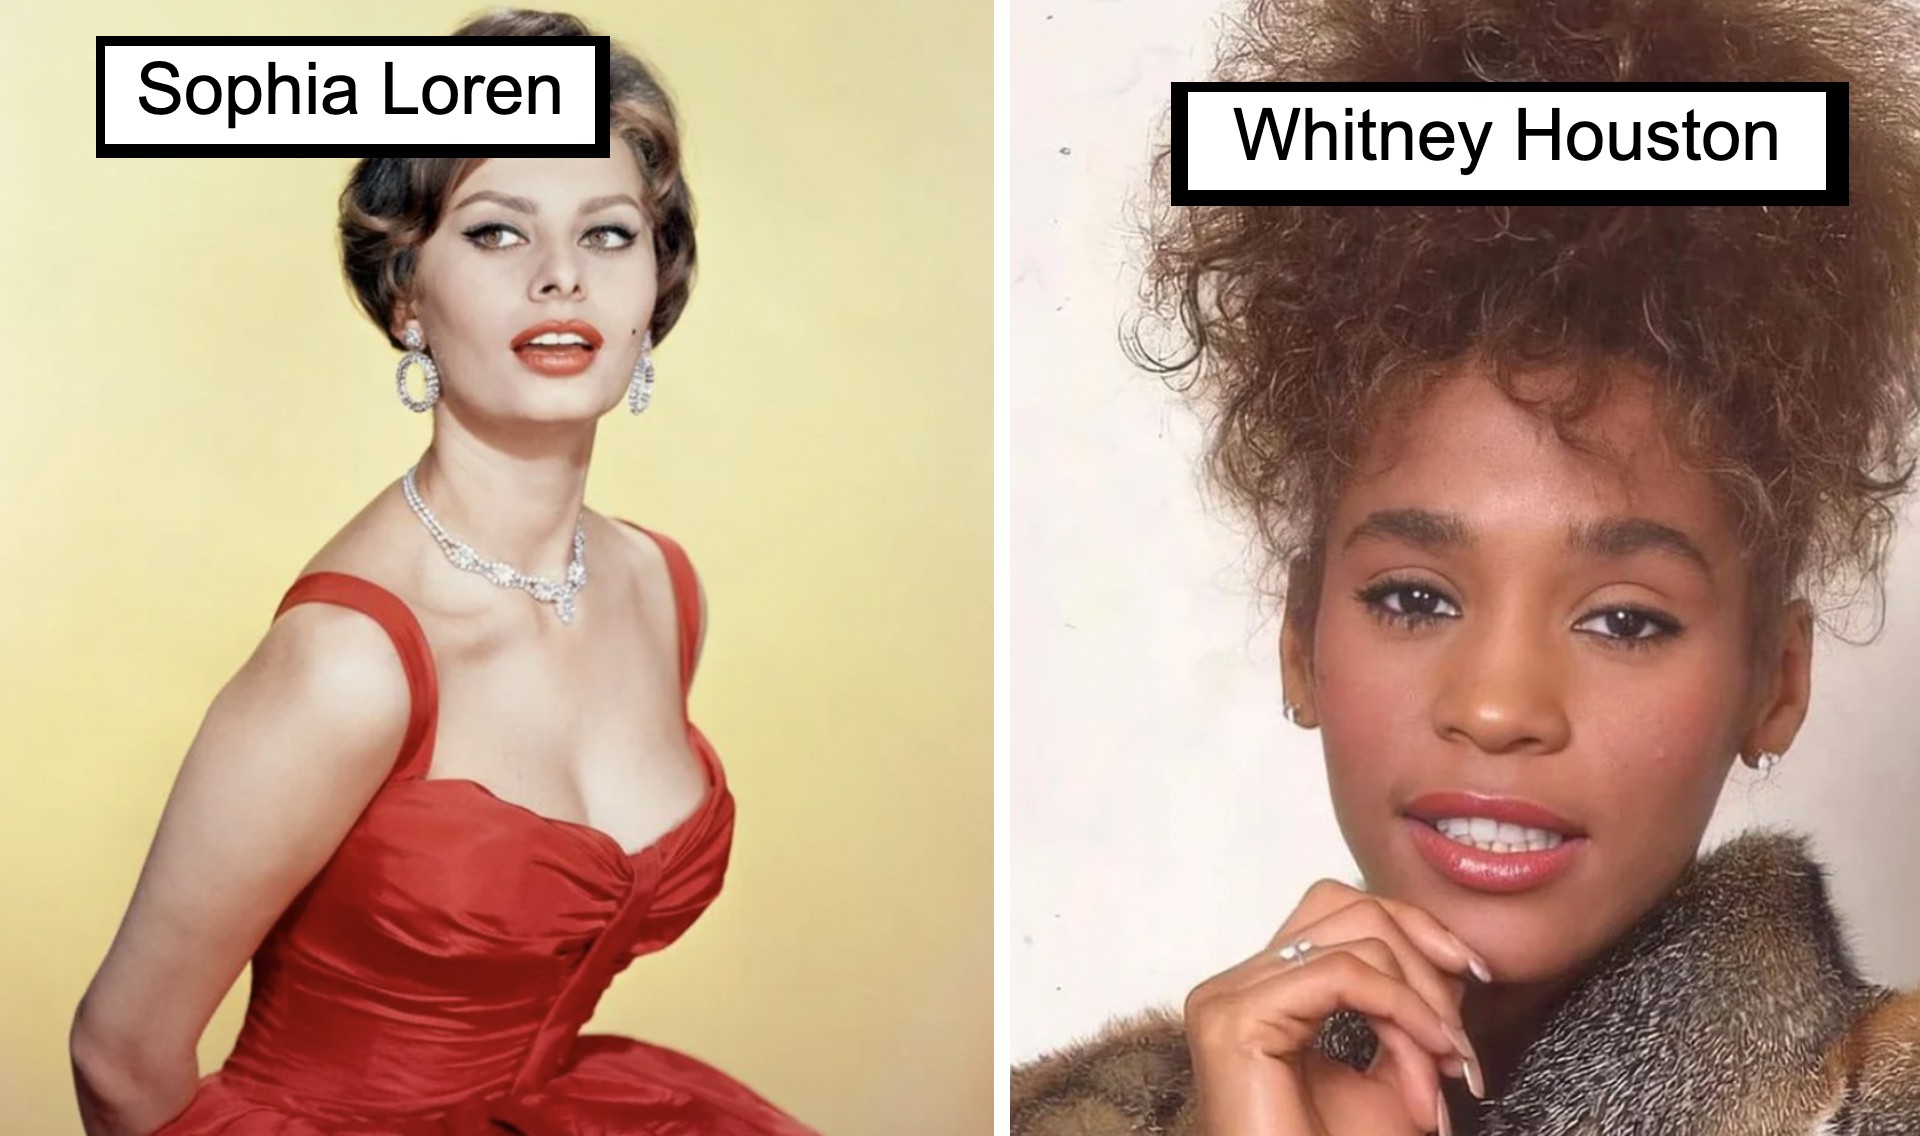 On the left, a woman in a red dress with diamond jewelry is labeled "Sophia Loren." On the right, a woman with curly hair in a fur-like coat is labeled "Whitney Houston." Both women are looking towards the camera.